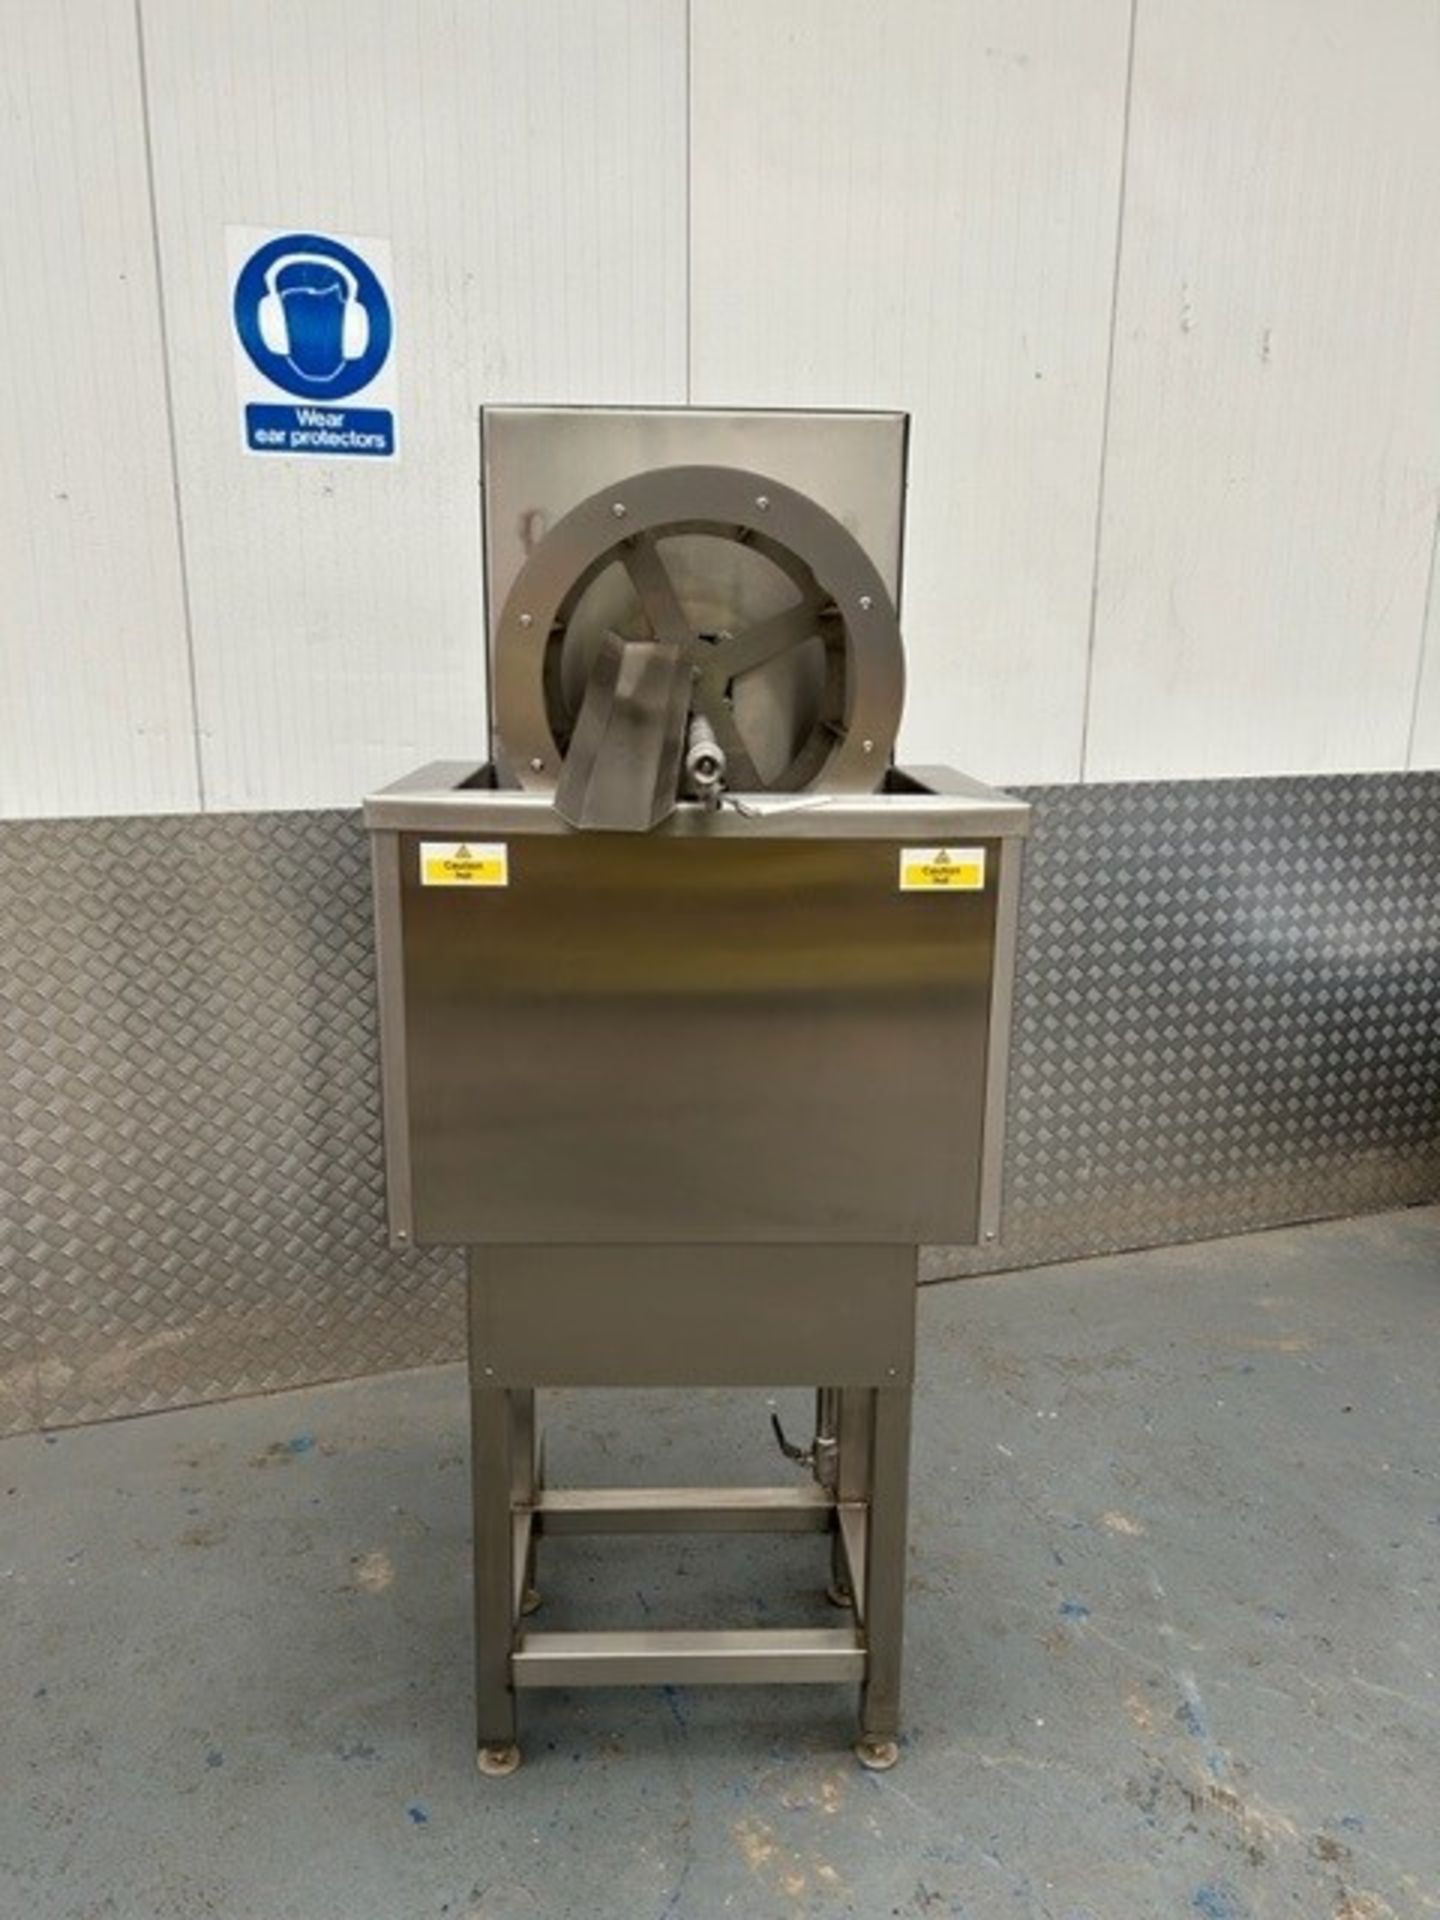 Bulldog Rotary Filter For Fryer - Image 4 of 4